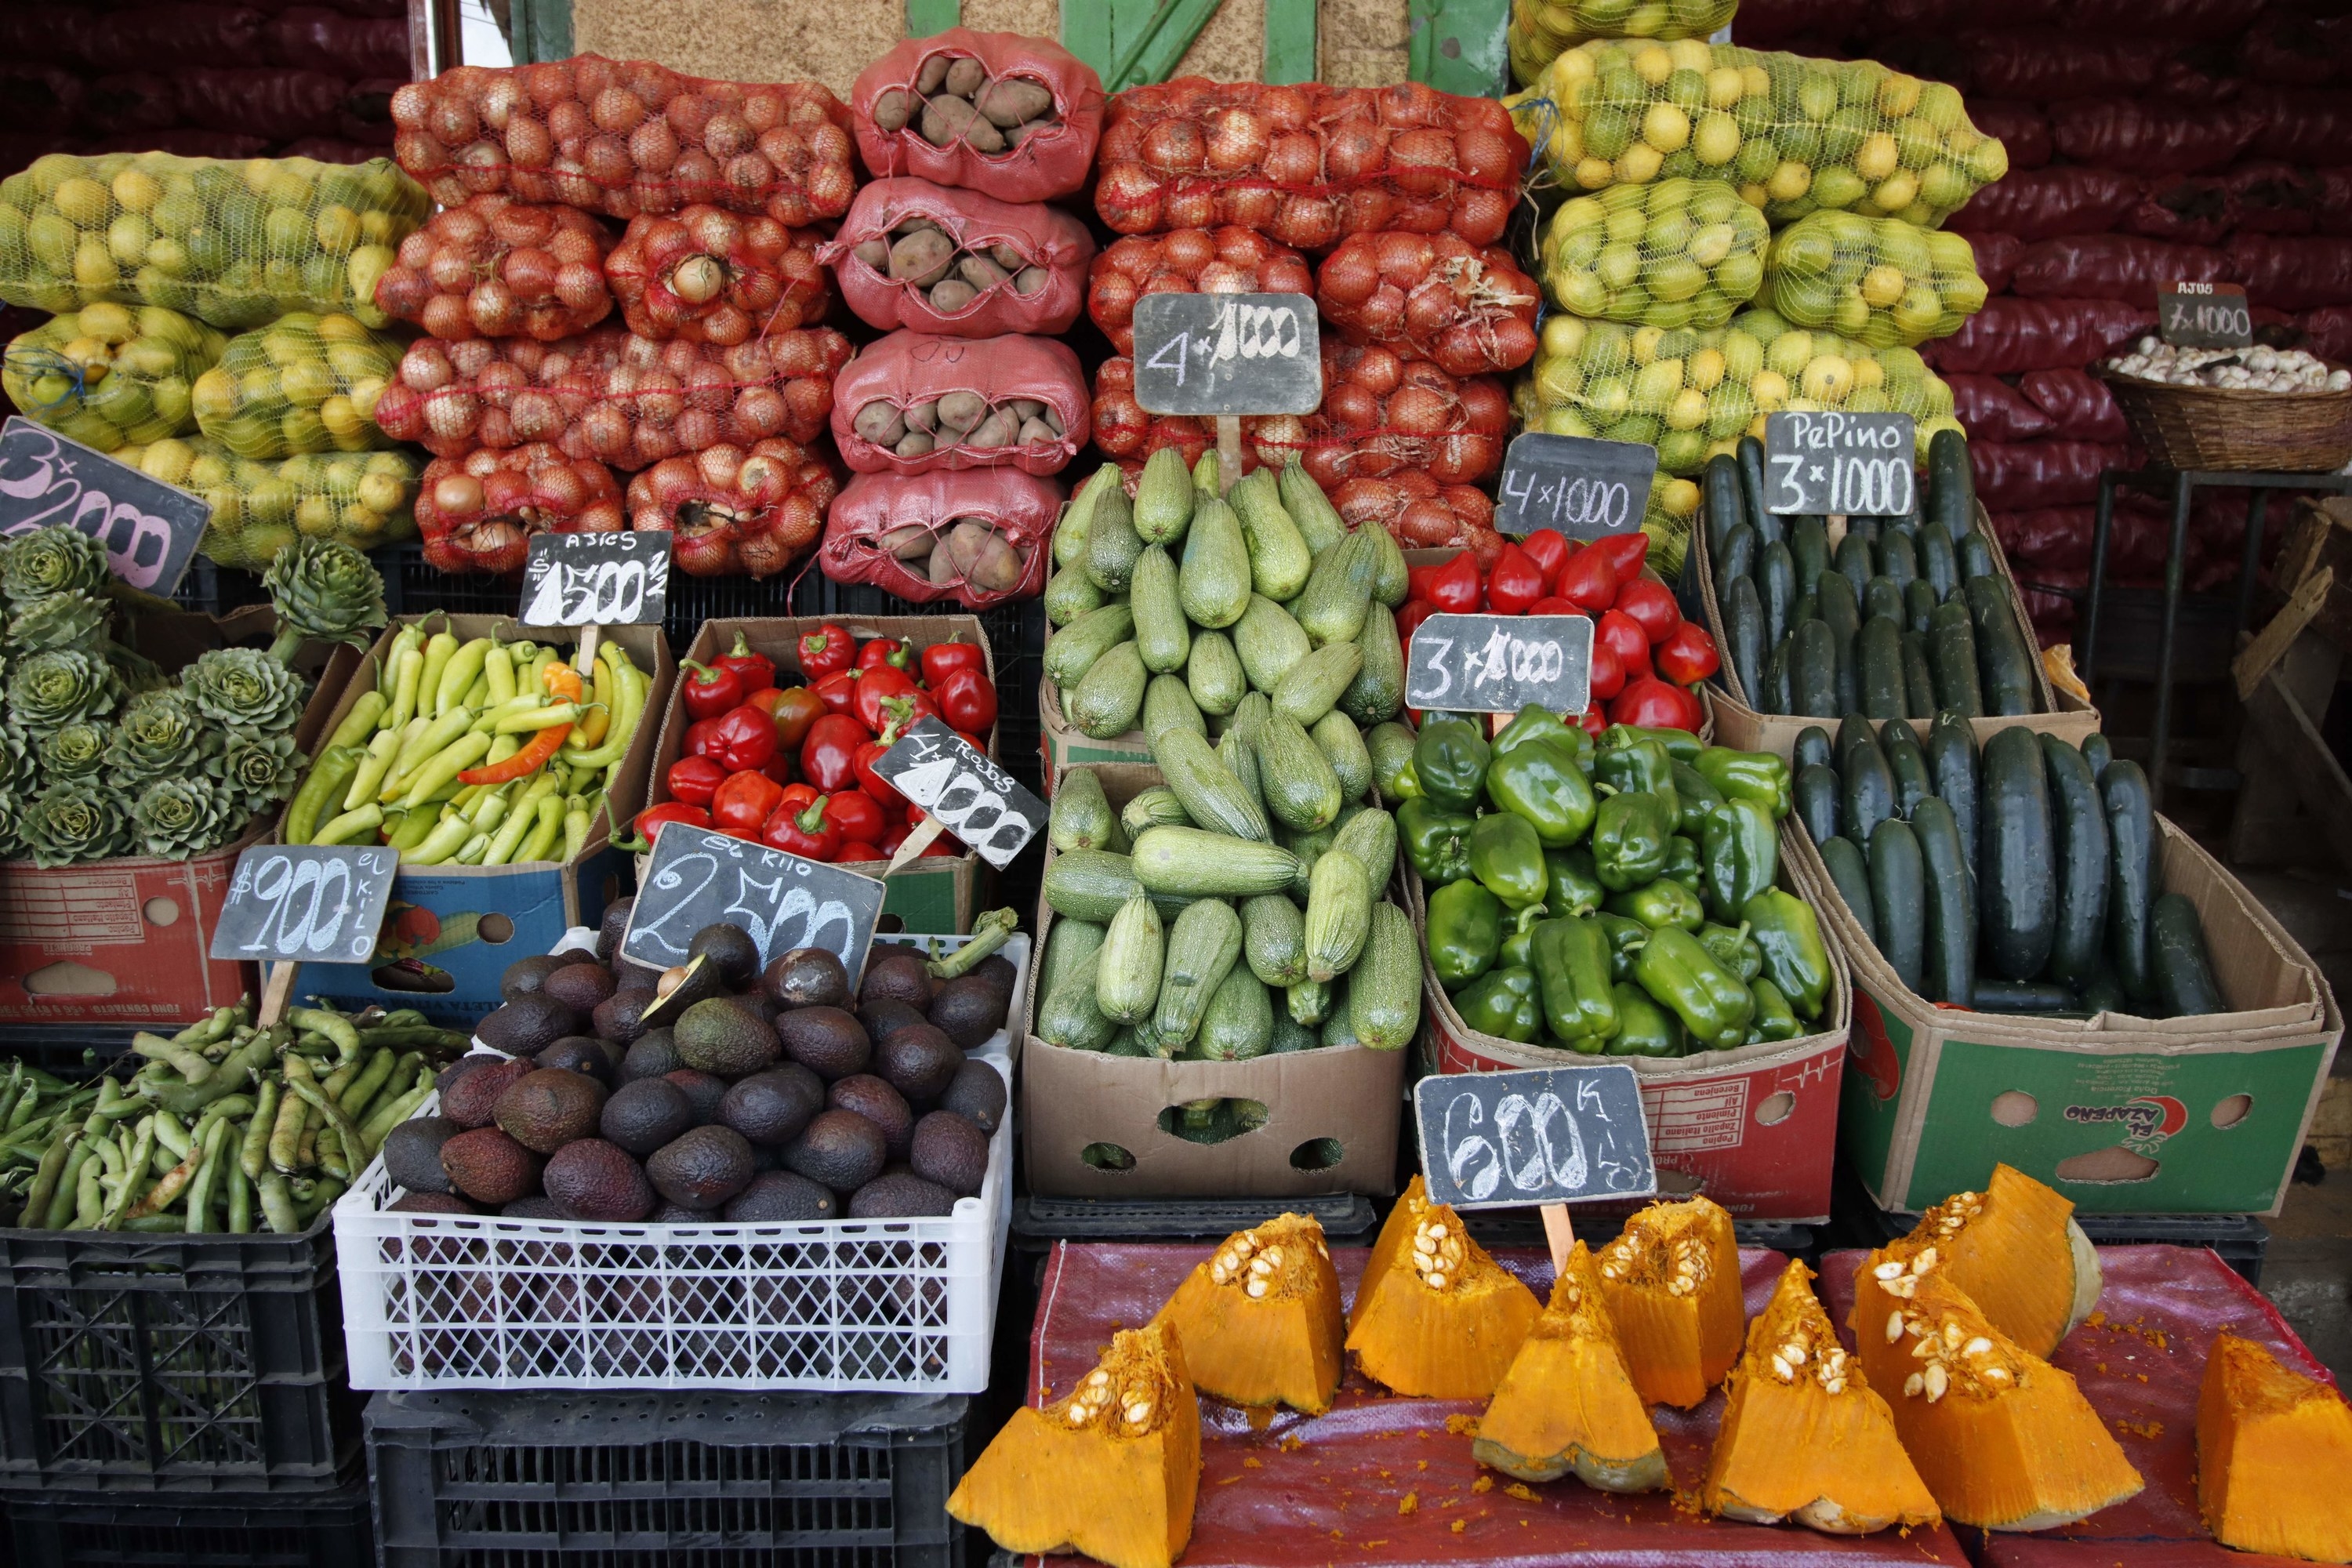 Fruits and vegetables are displayed at a market